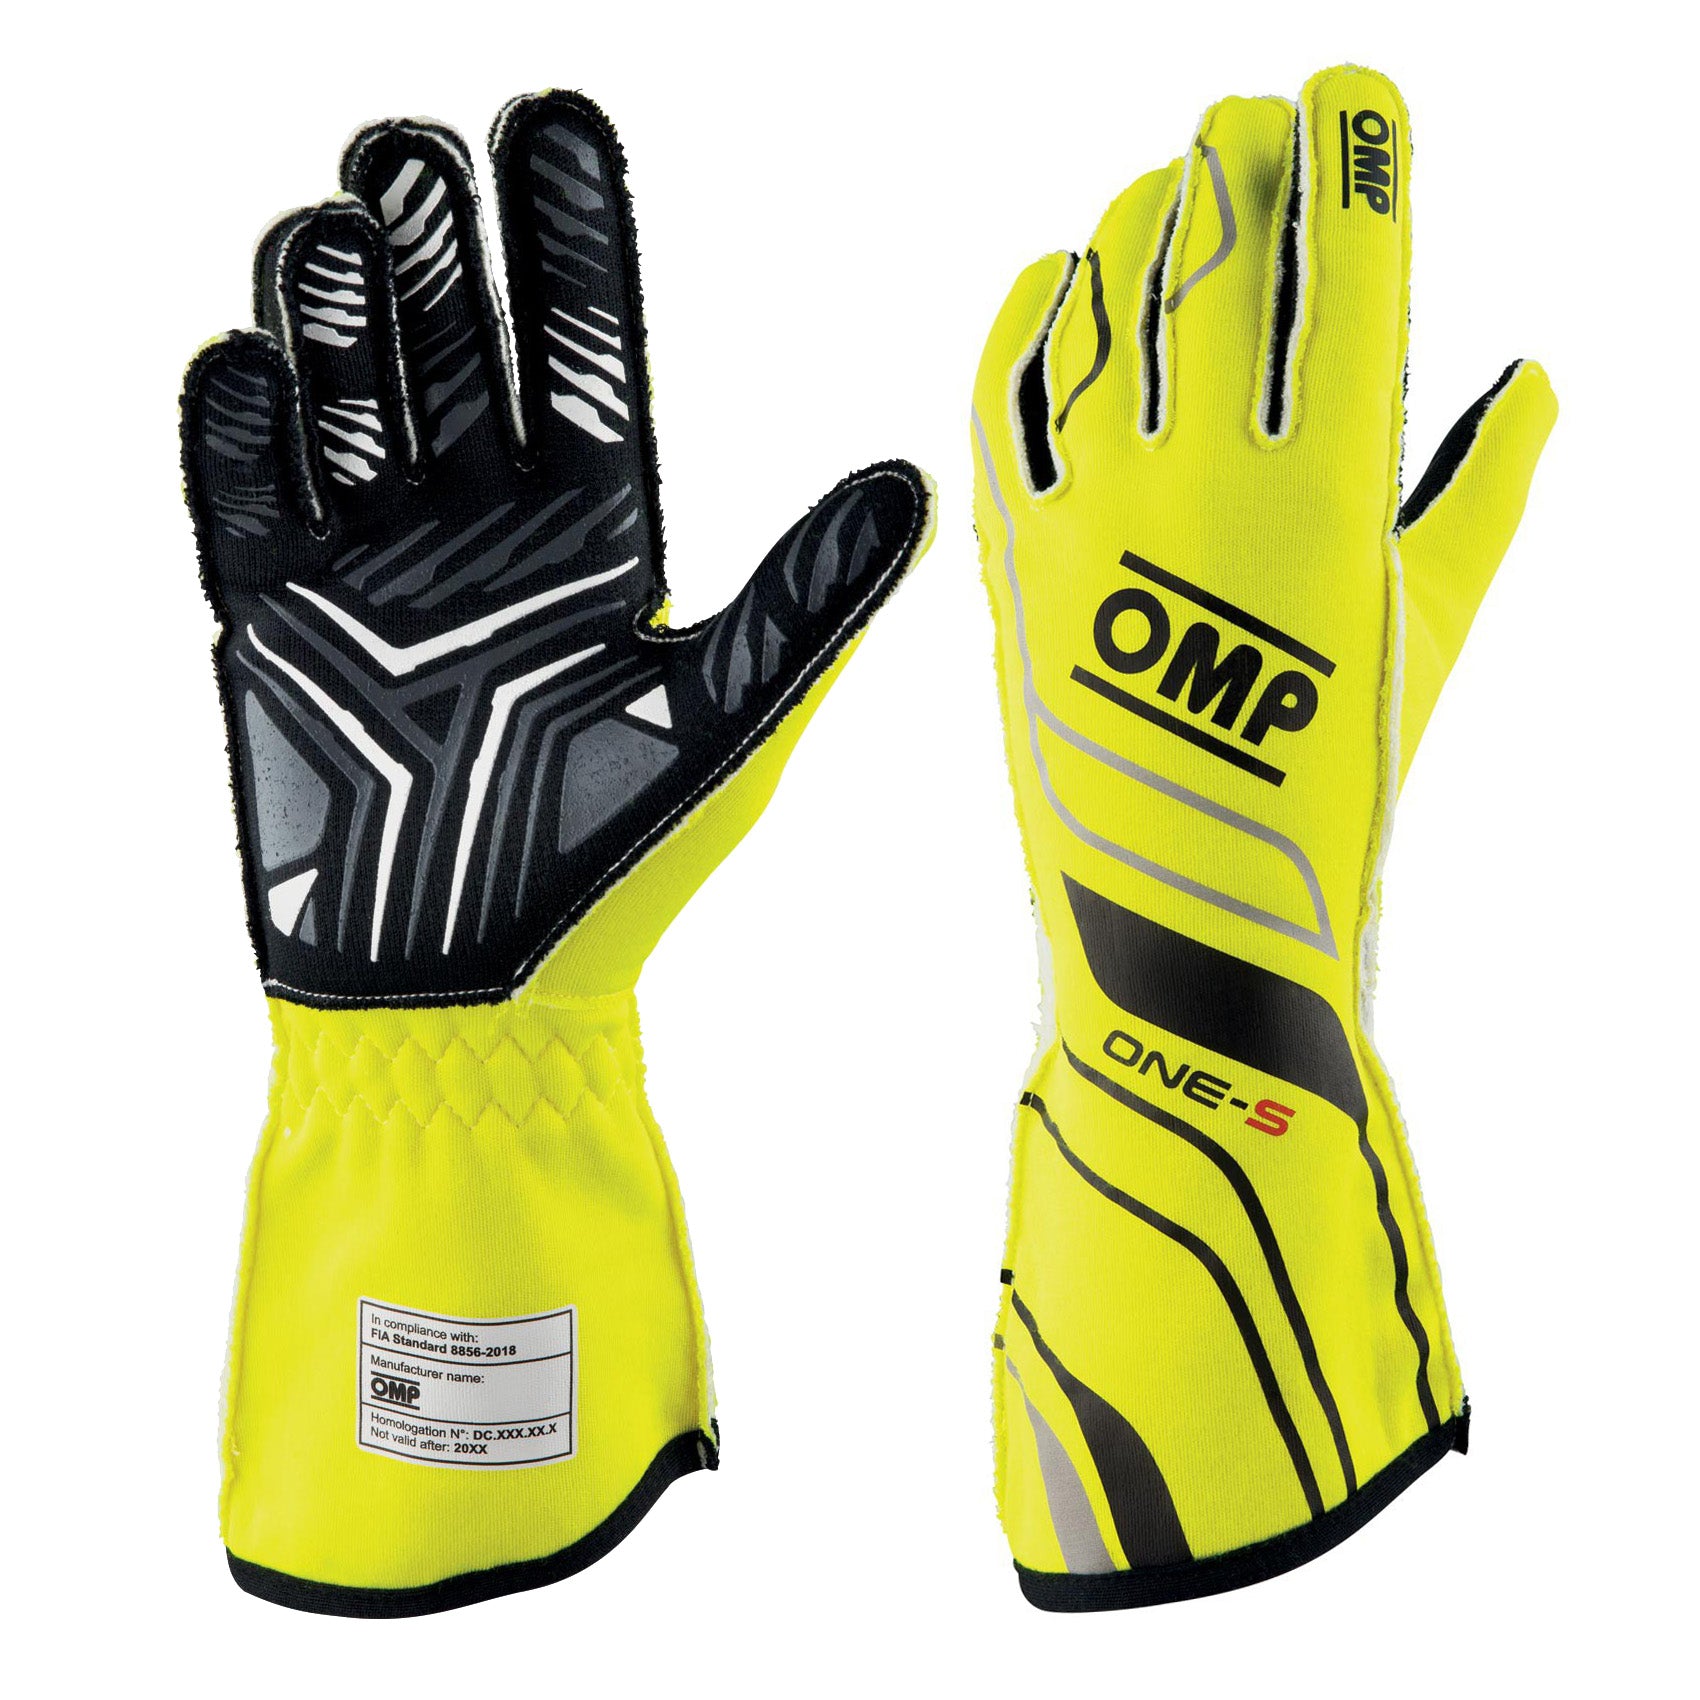 OMP One-S Racing Gloves